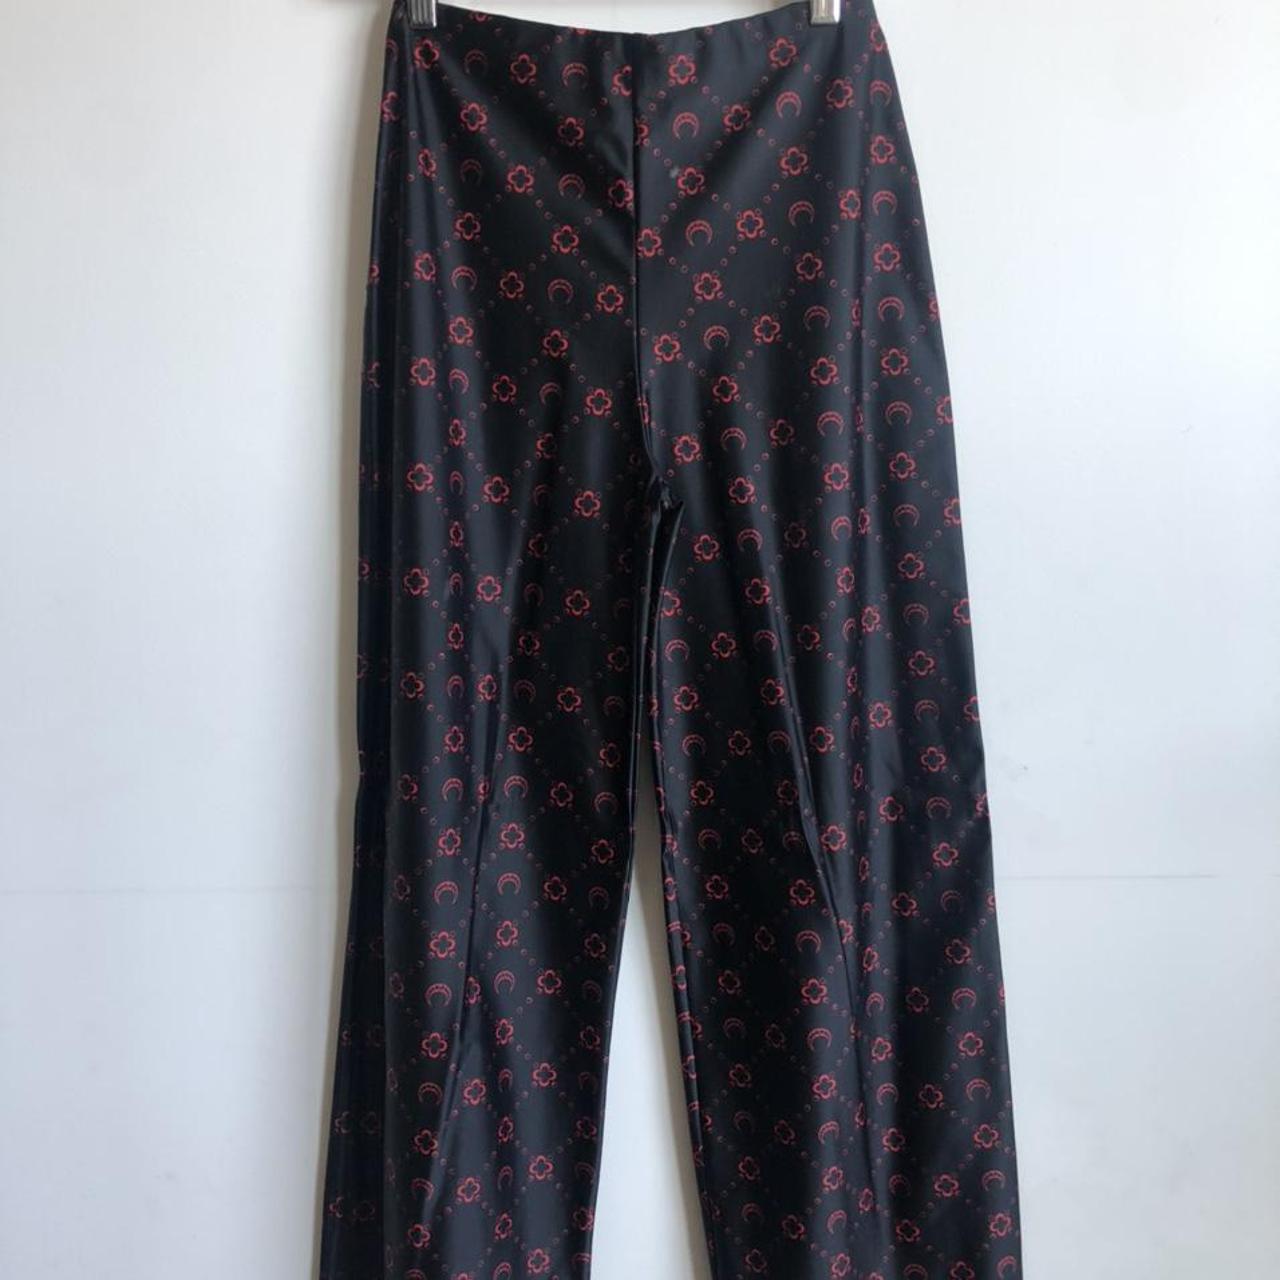 Marine Serre Women's Black and Red Trousers | Depop